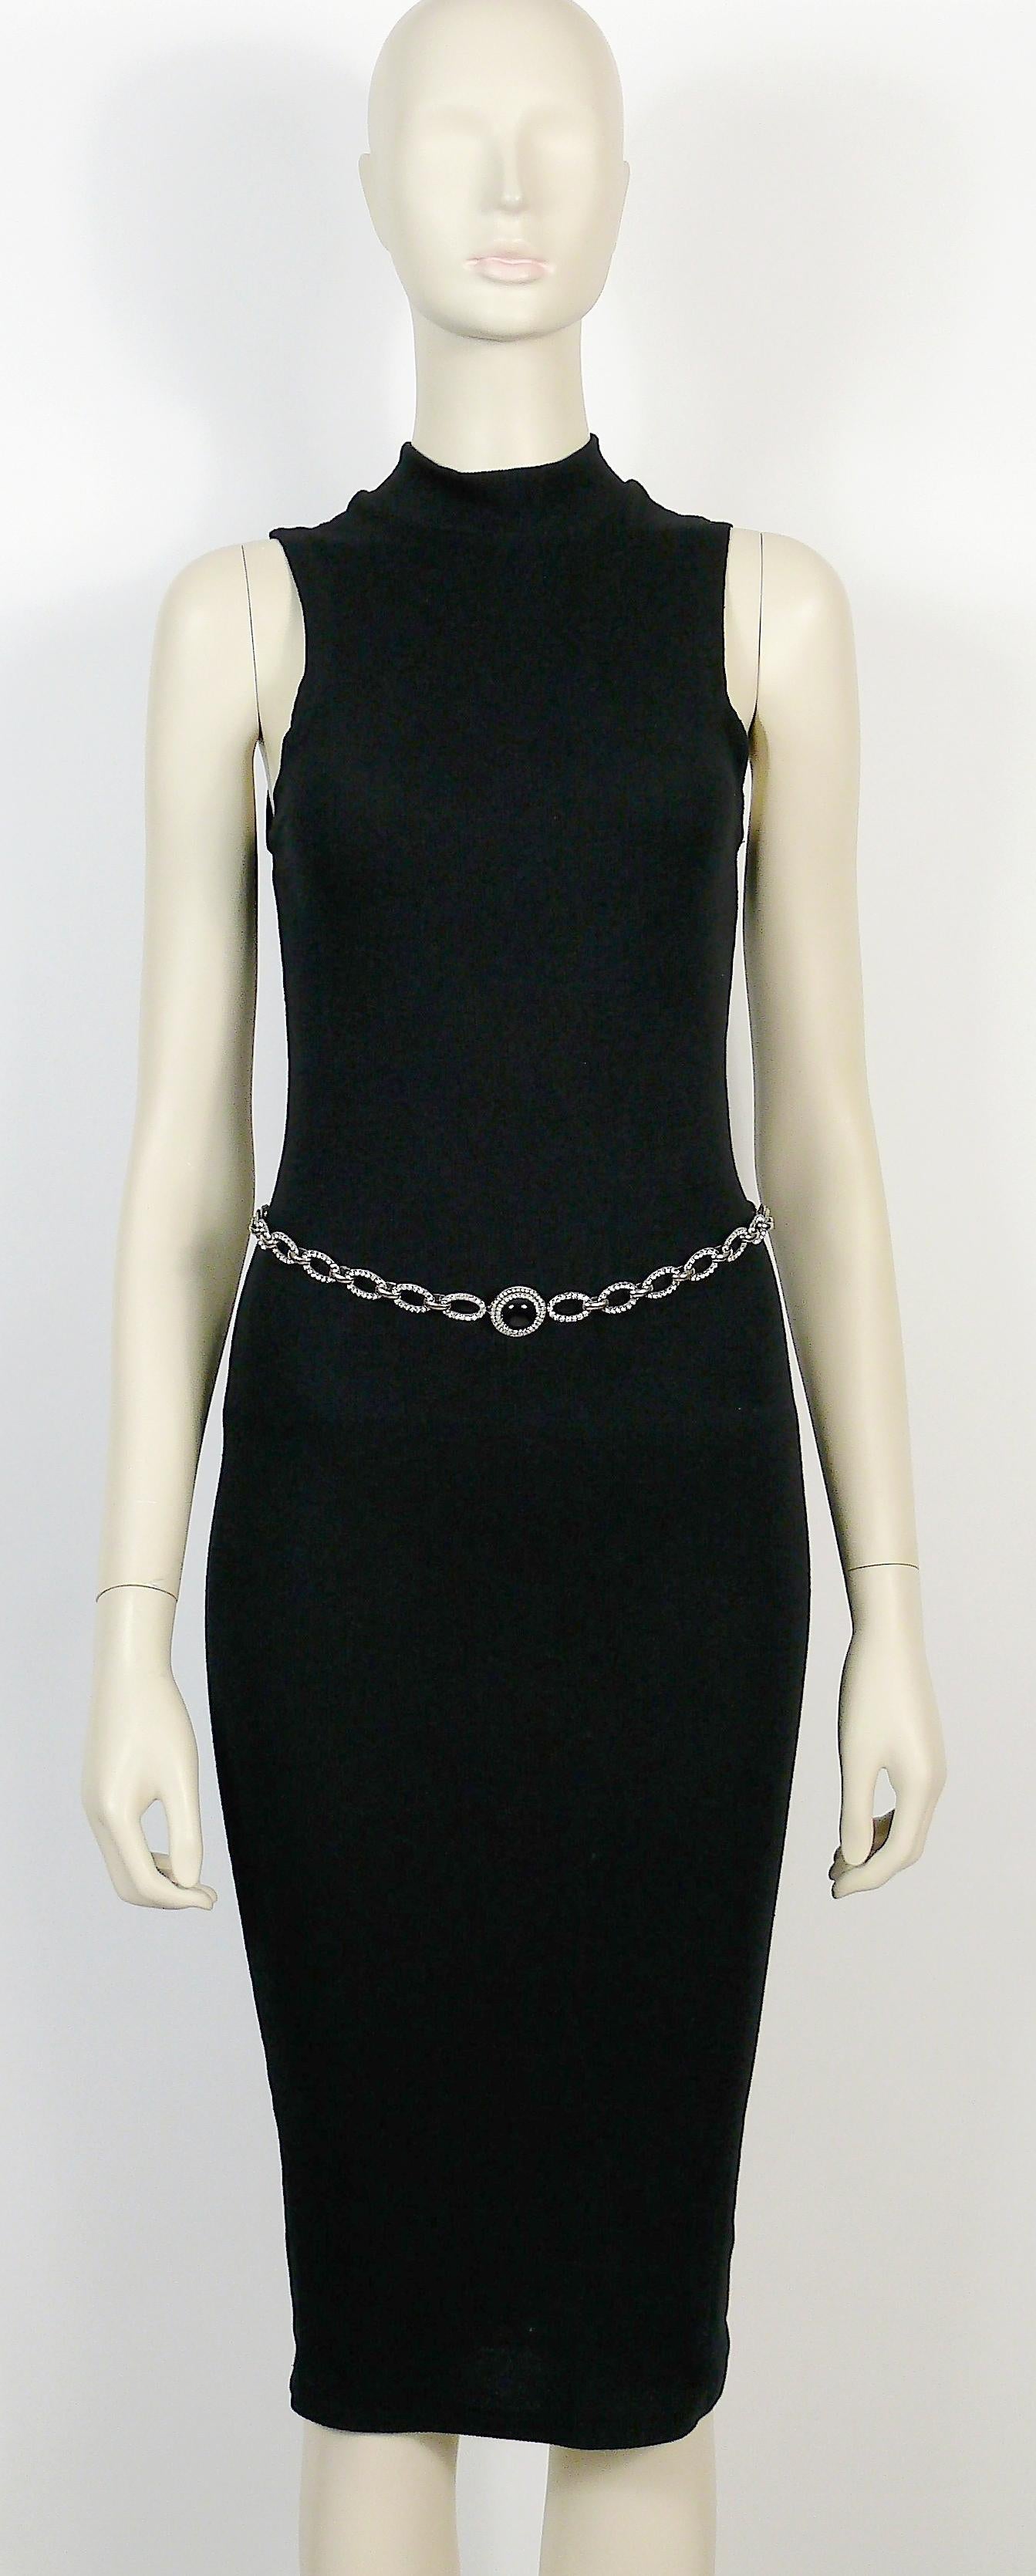 YVES SAINT LAURENT vintage 1970 silver toned chain belt featuring oval links embellished with clear crystals and a black glass cabochon.

Similar model in the collections of the METROPOLITAN MUSEUM OF ART in NEW YORK.

Embossed YSL on the reverse of